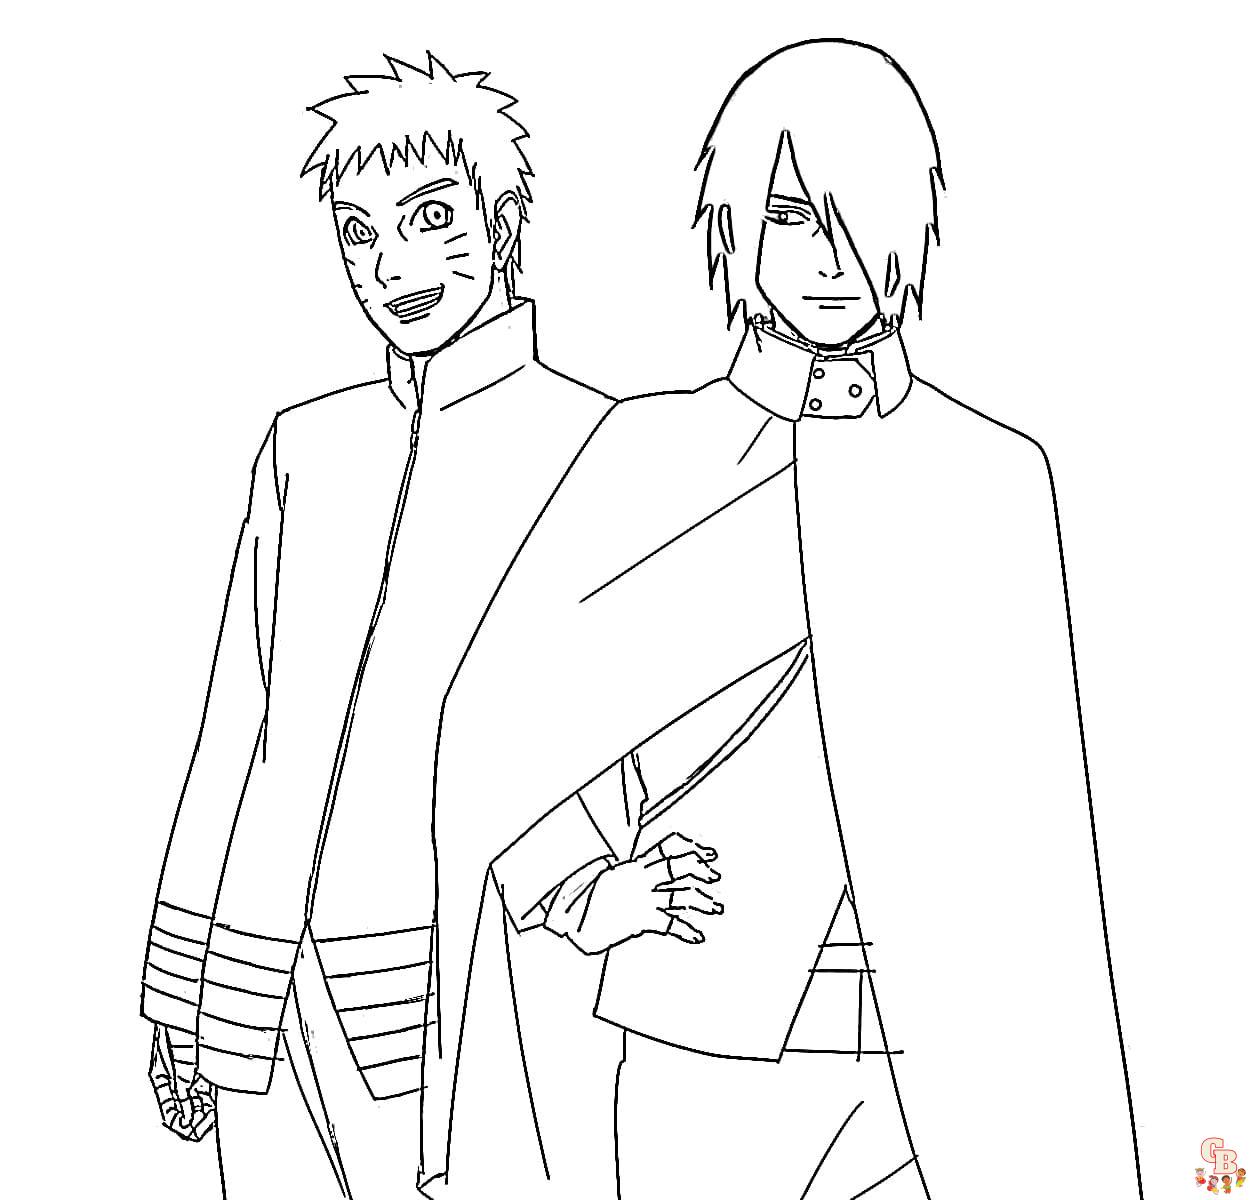 Sasuke Coloring Pages - Coloring Pages For Kids And Adults in 2023